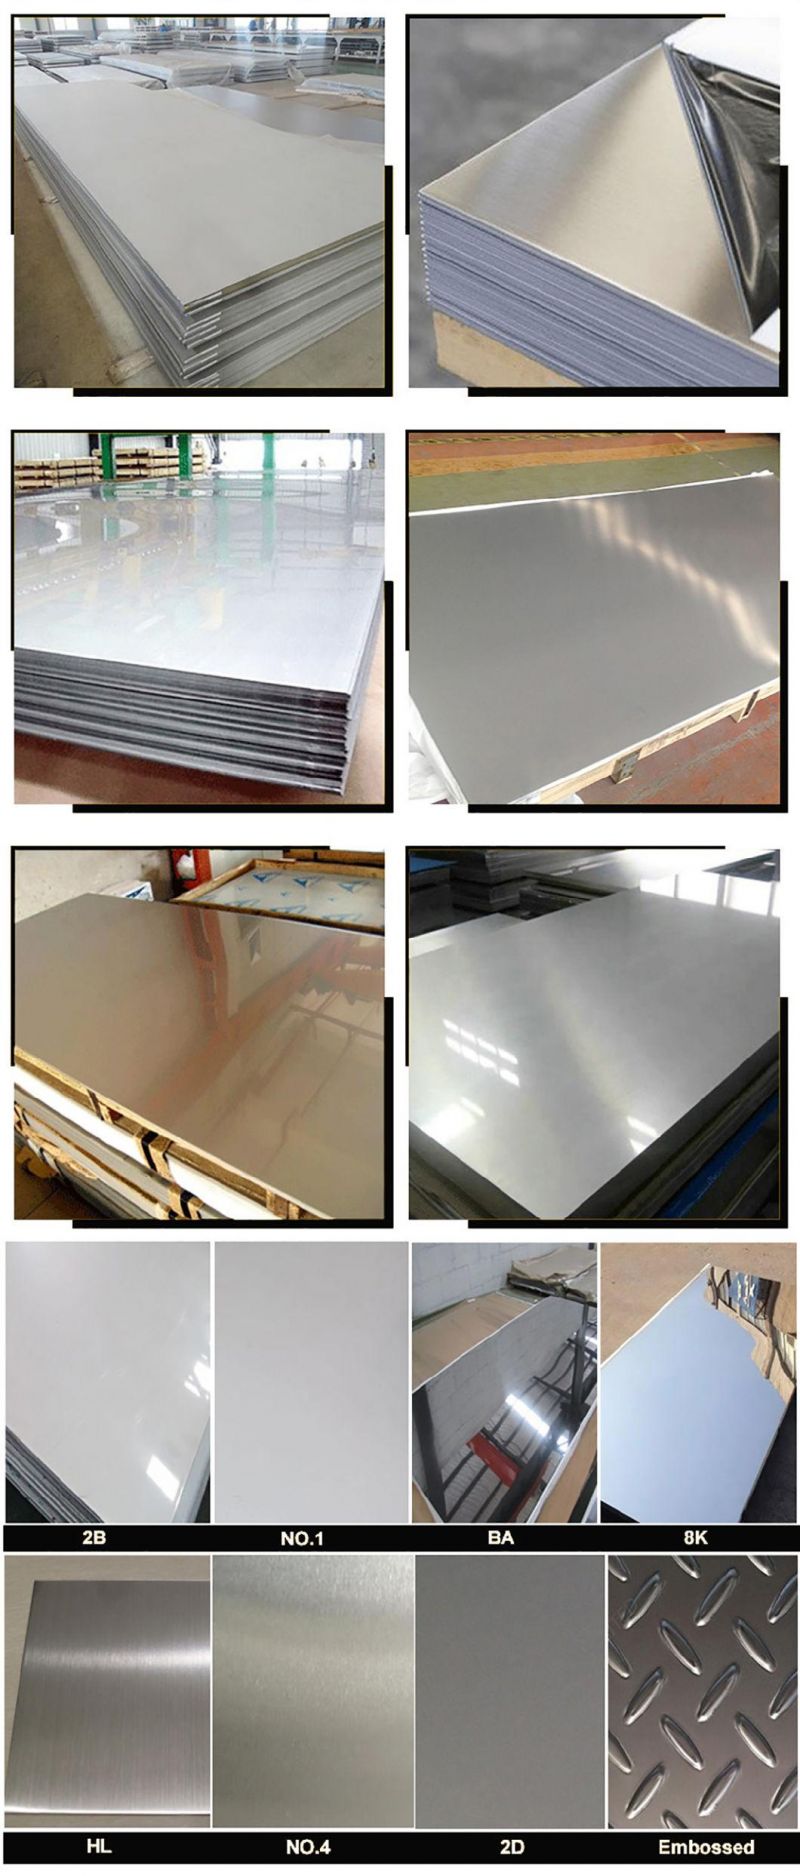 Top Quality AMS 2mm 3mm Thick 5605 5606 Alloy 706 Inconel 706 Steel Sheet Plates